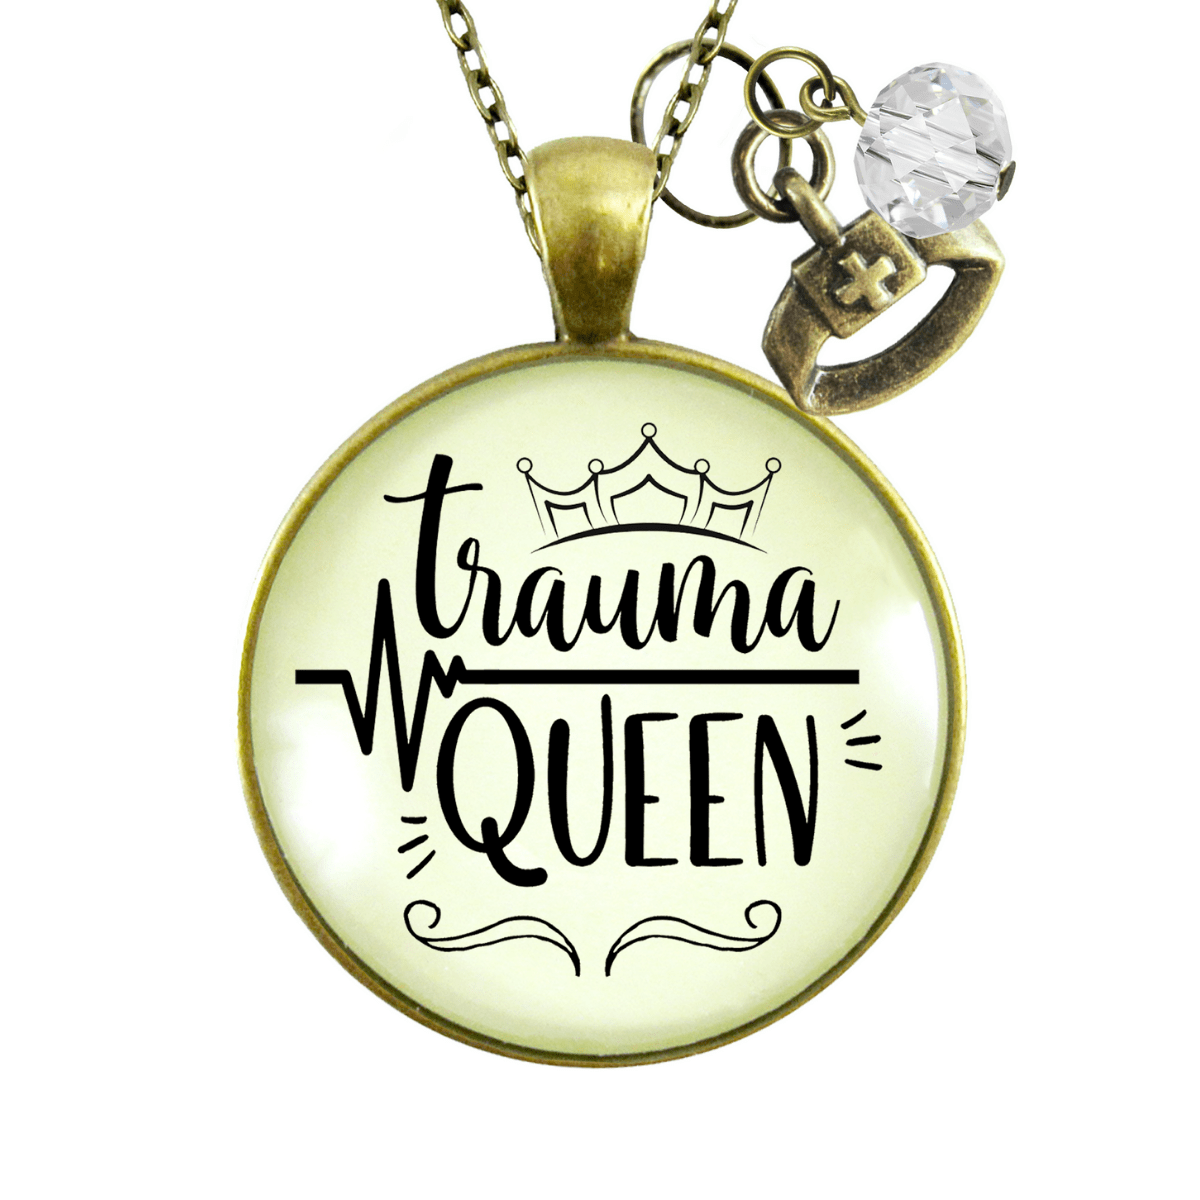 Gutsy Goodness Trauma Queen Necklace Nurse Medical Assistant Funny Quote Jewelry - Gutsy Goodness Handmade Jewelry;Trauma Queen Necklace Nurse Medical Assistant Funny Quote Jewelry - Gutsy Goodness Handmade Jewelry Gifts